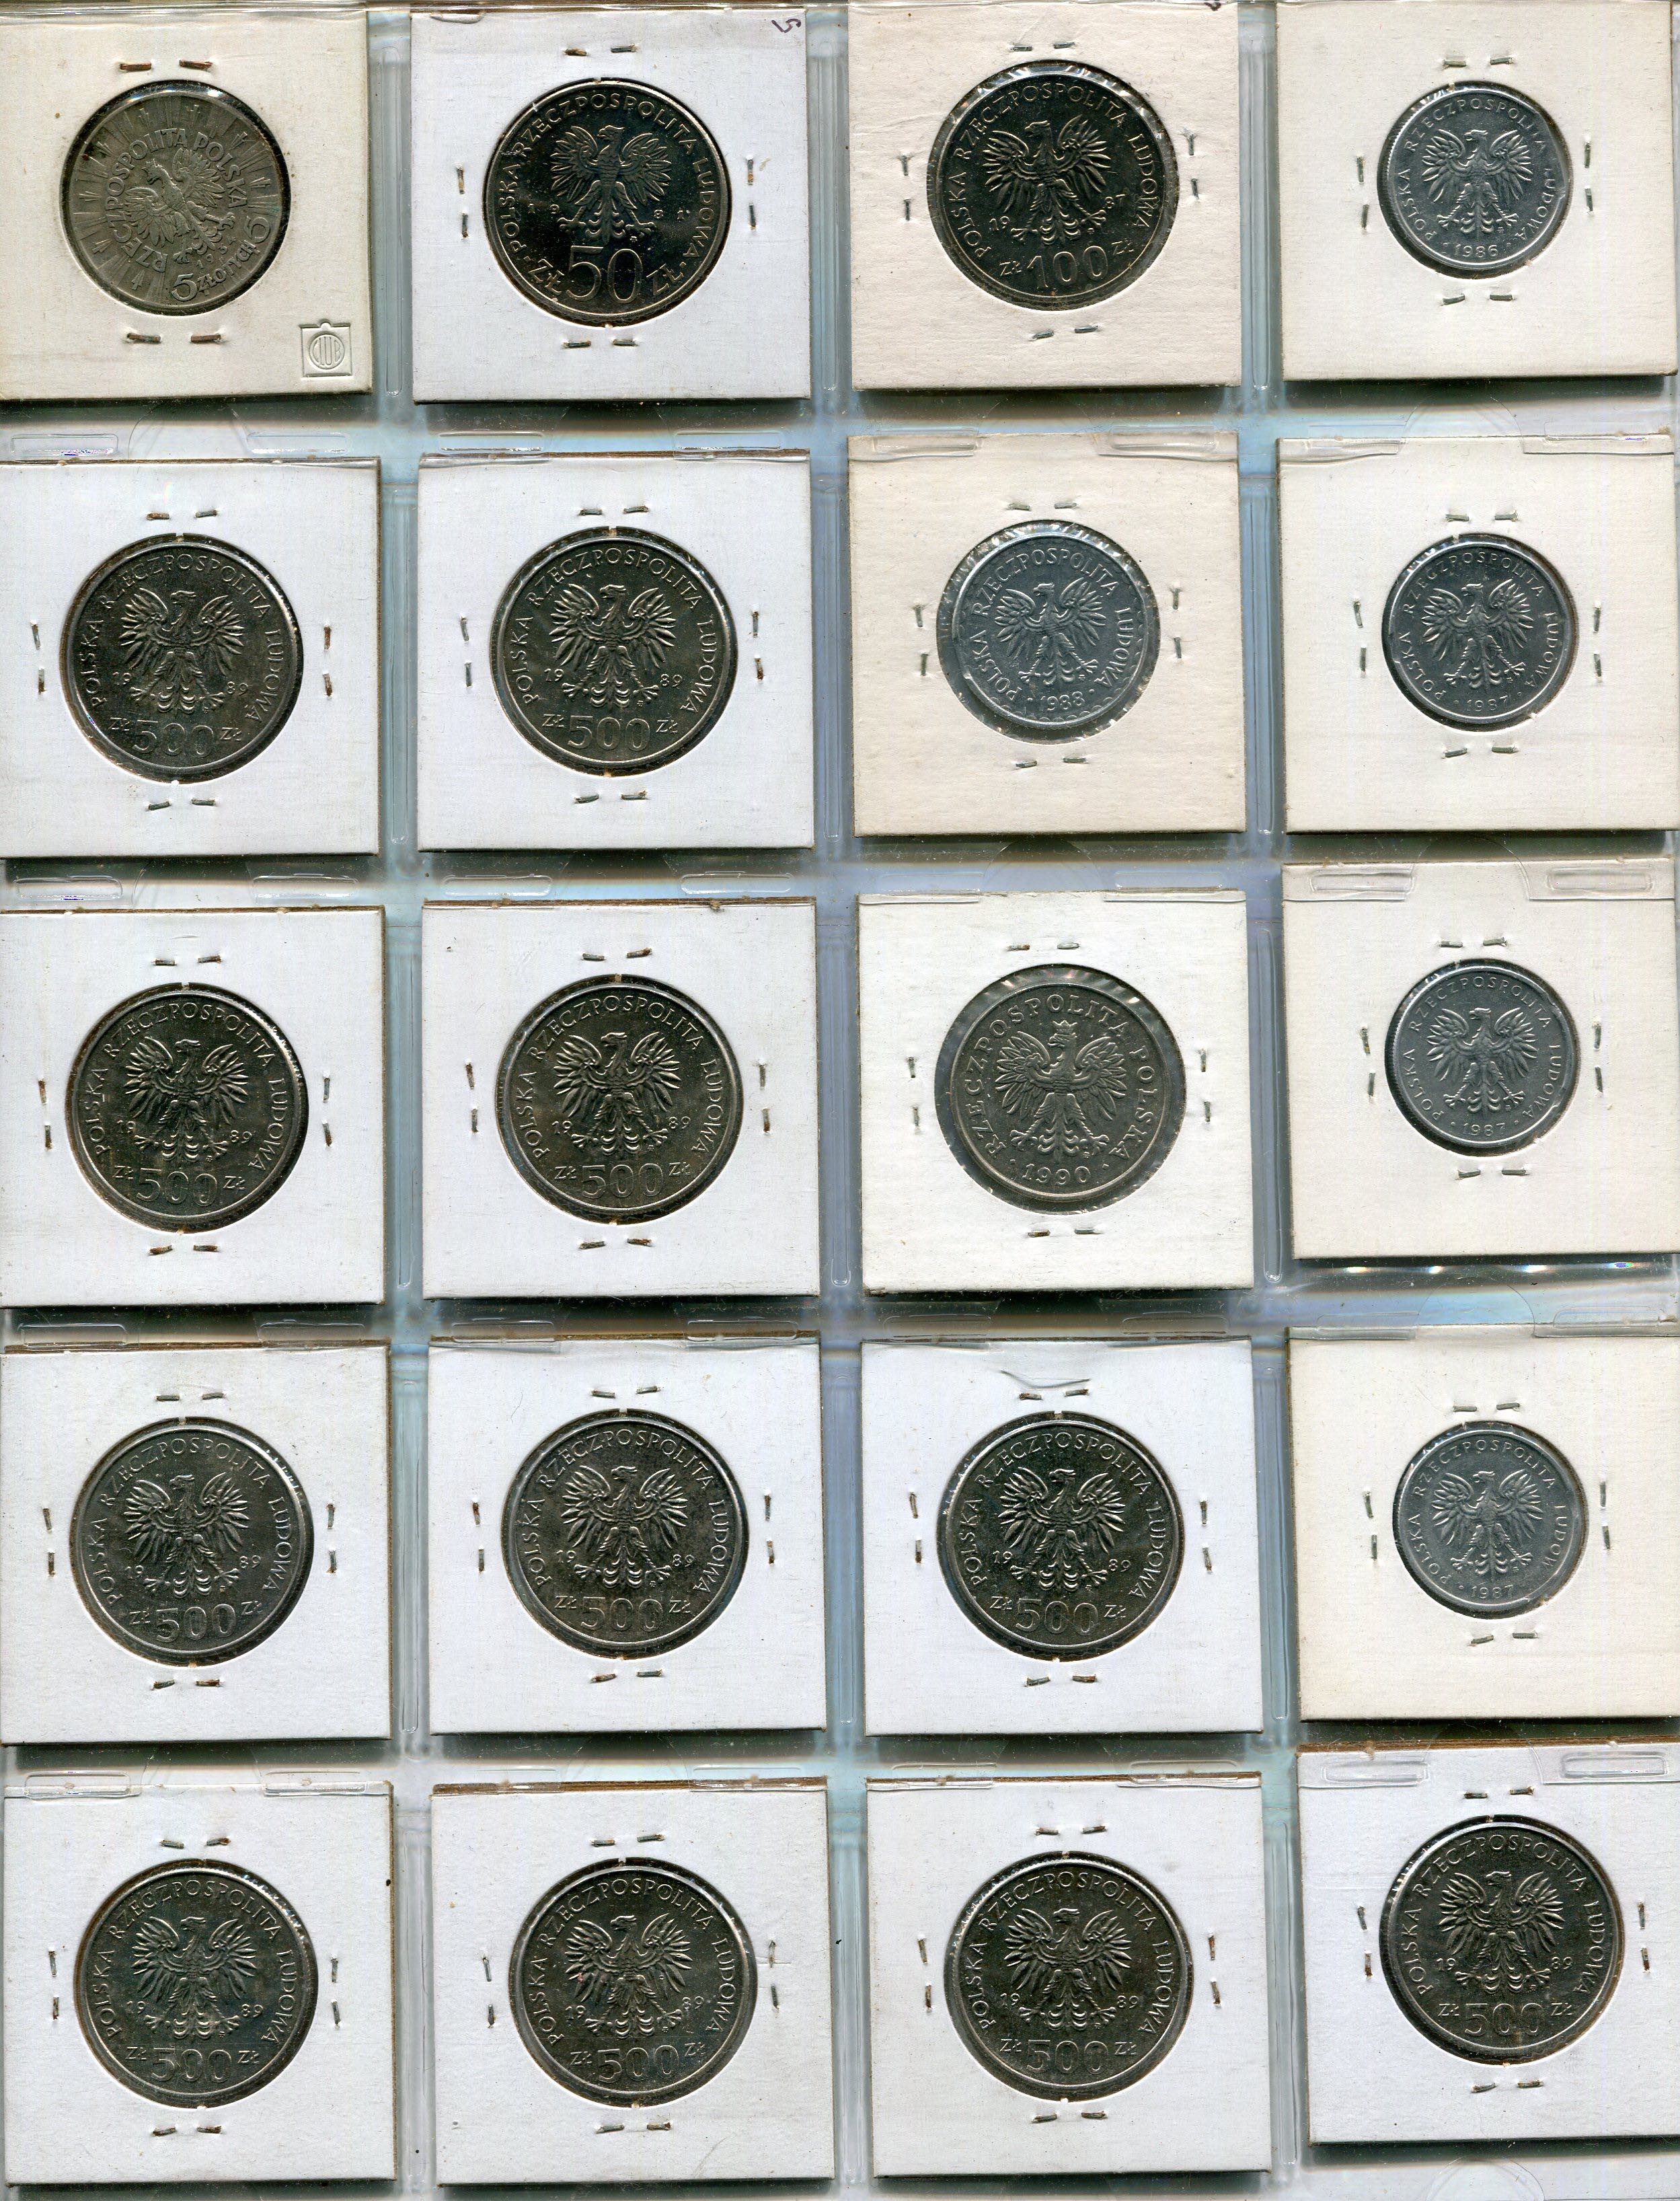 Poland Lot of 32 Coins 1934 - 1990